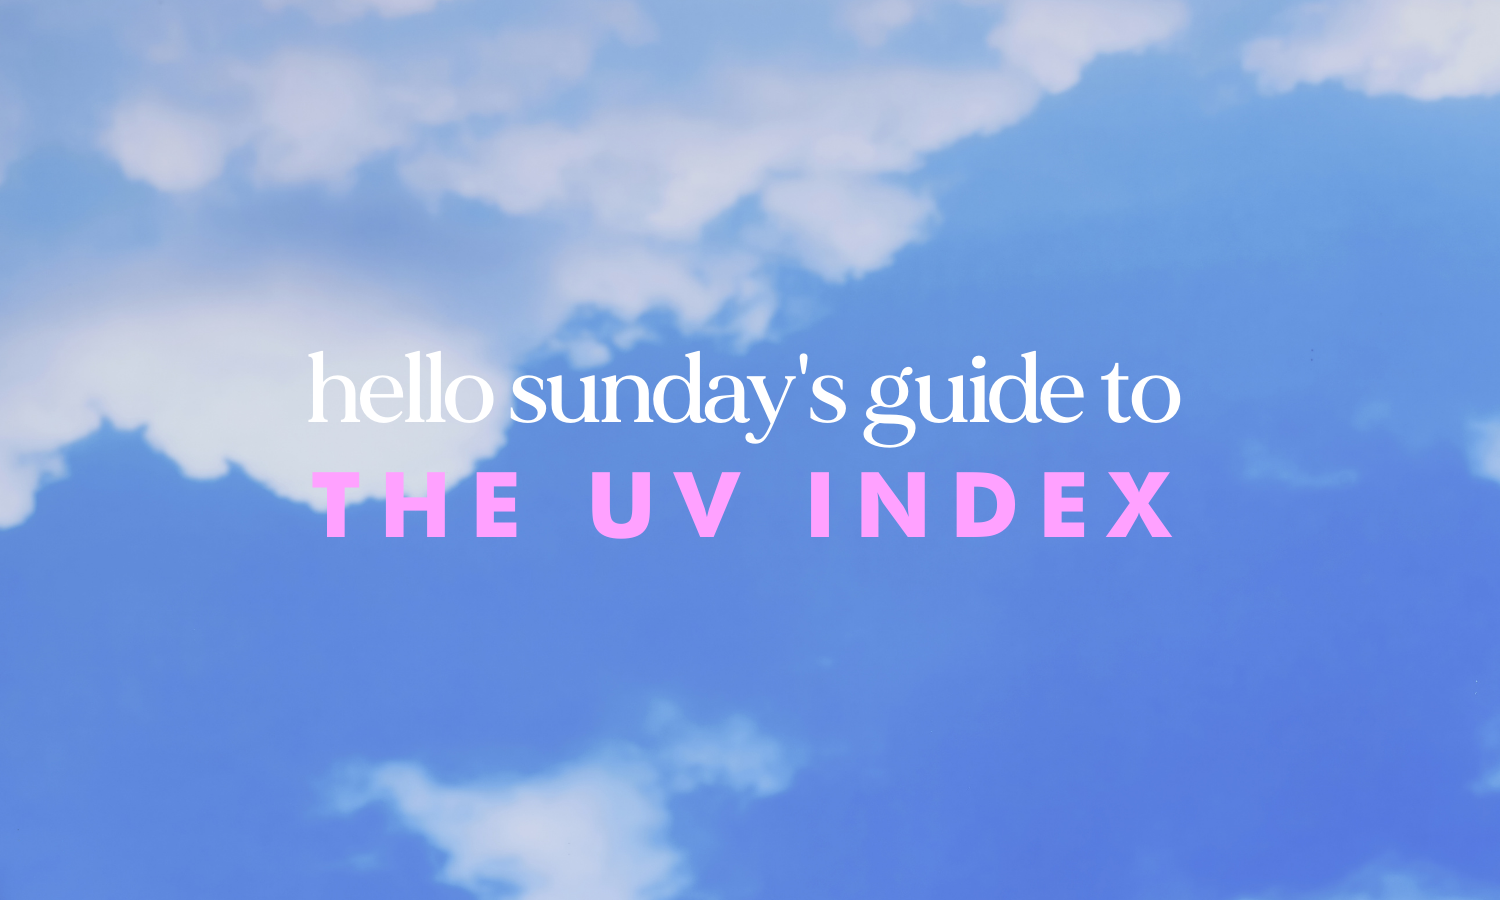 Hello UV Index: A guide to the UV Index